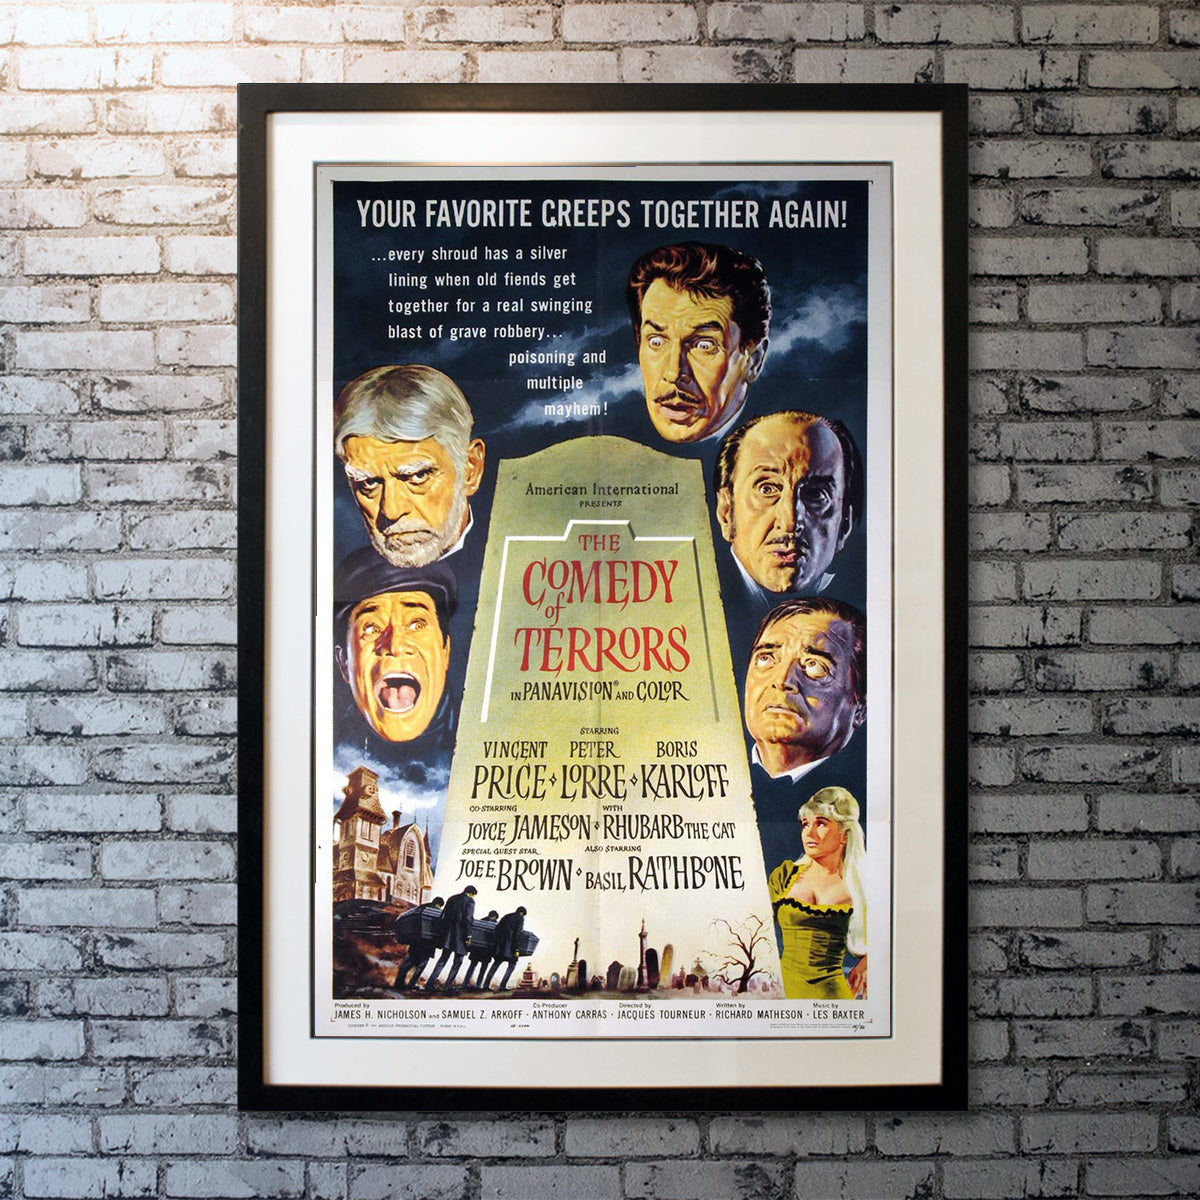 Comedy of Terrors, The (1964 R)